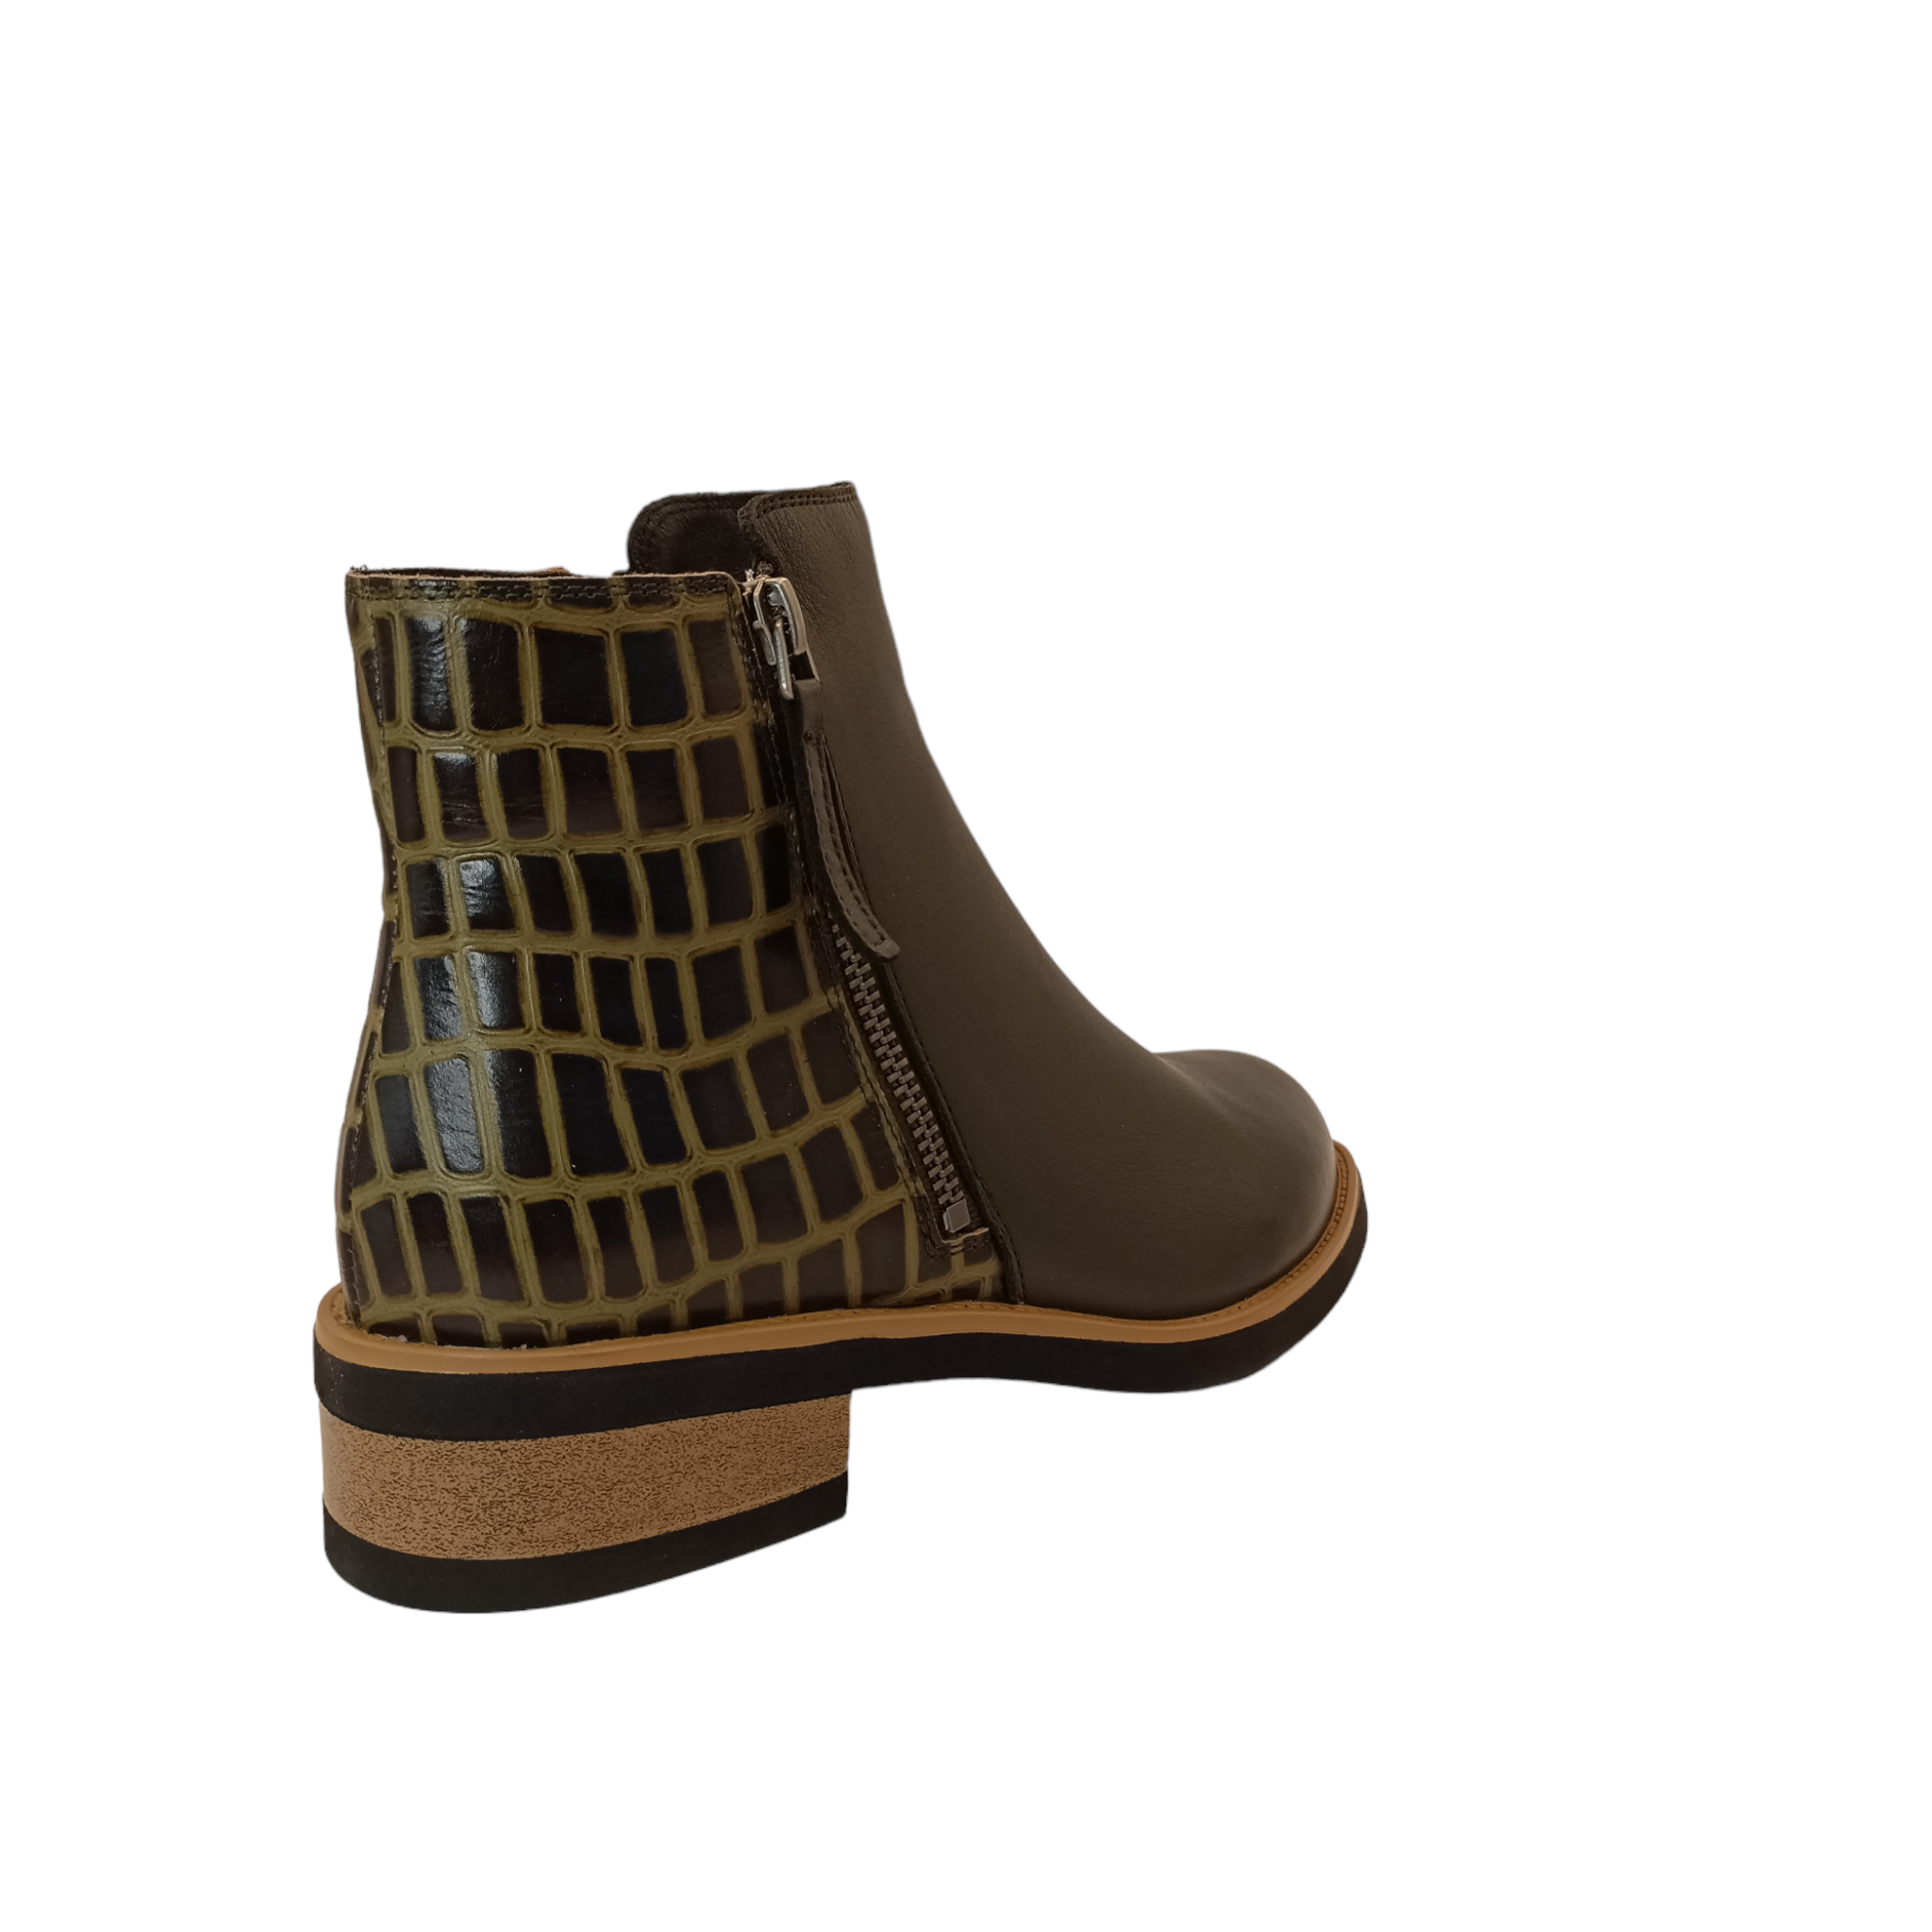 Shop Dungeon Bresley - with shoe&me - from Bresley - Boots - boots, Winter, Womens - [collection]